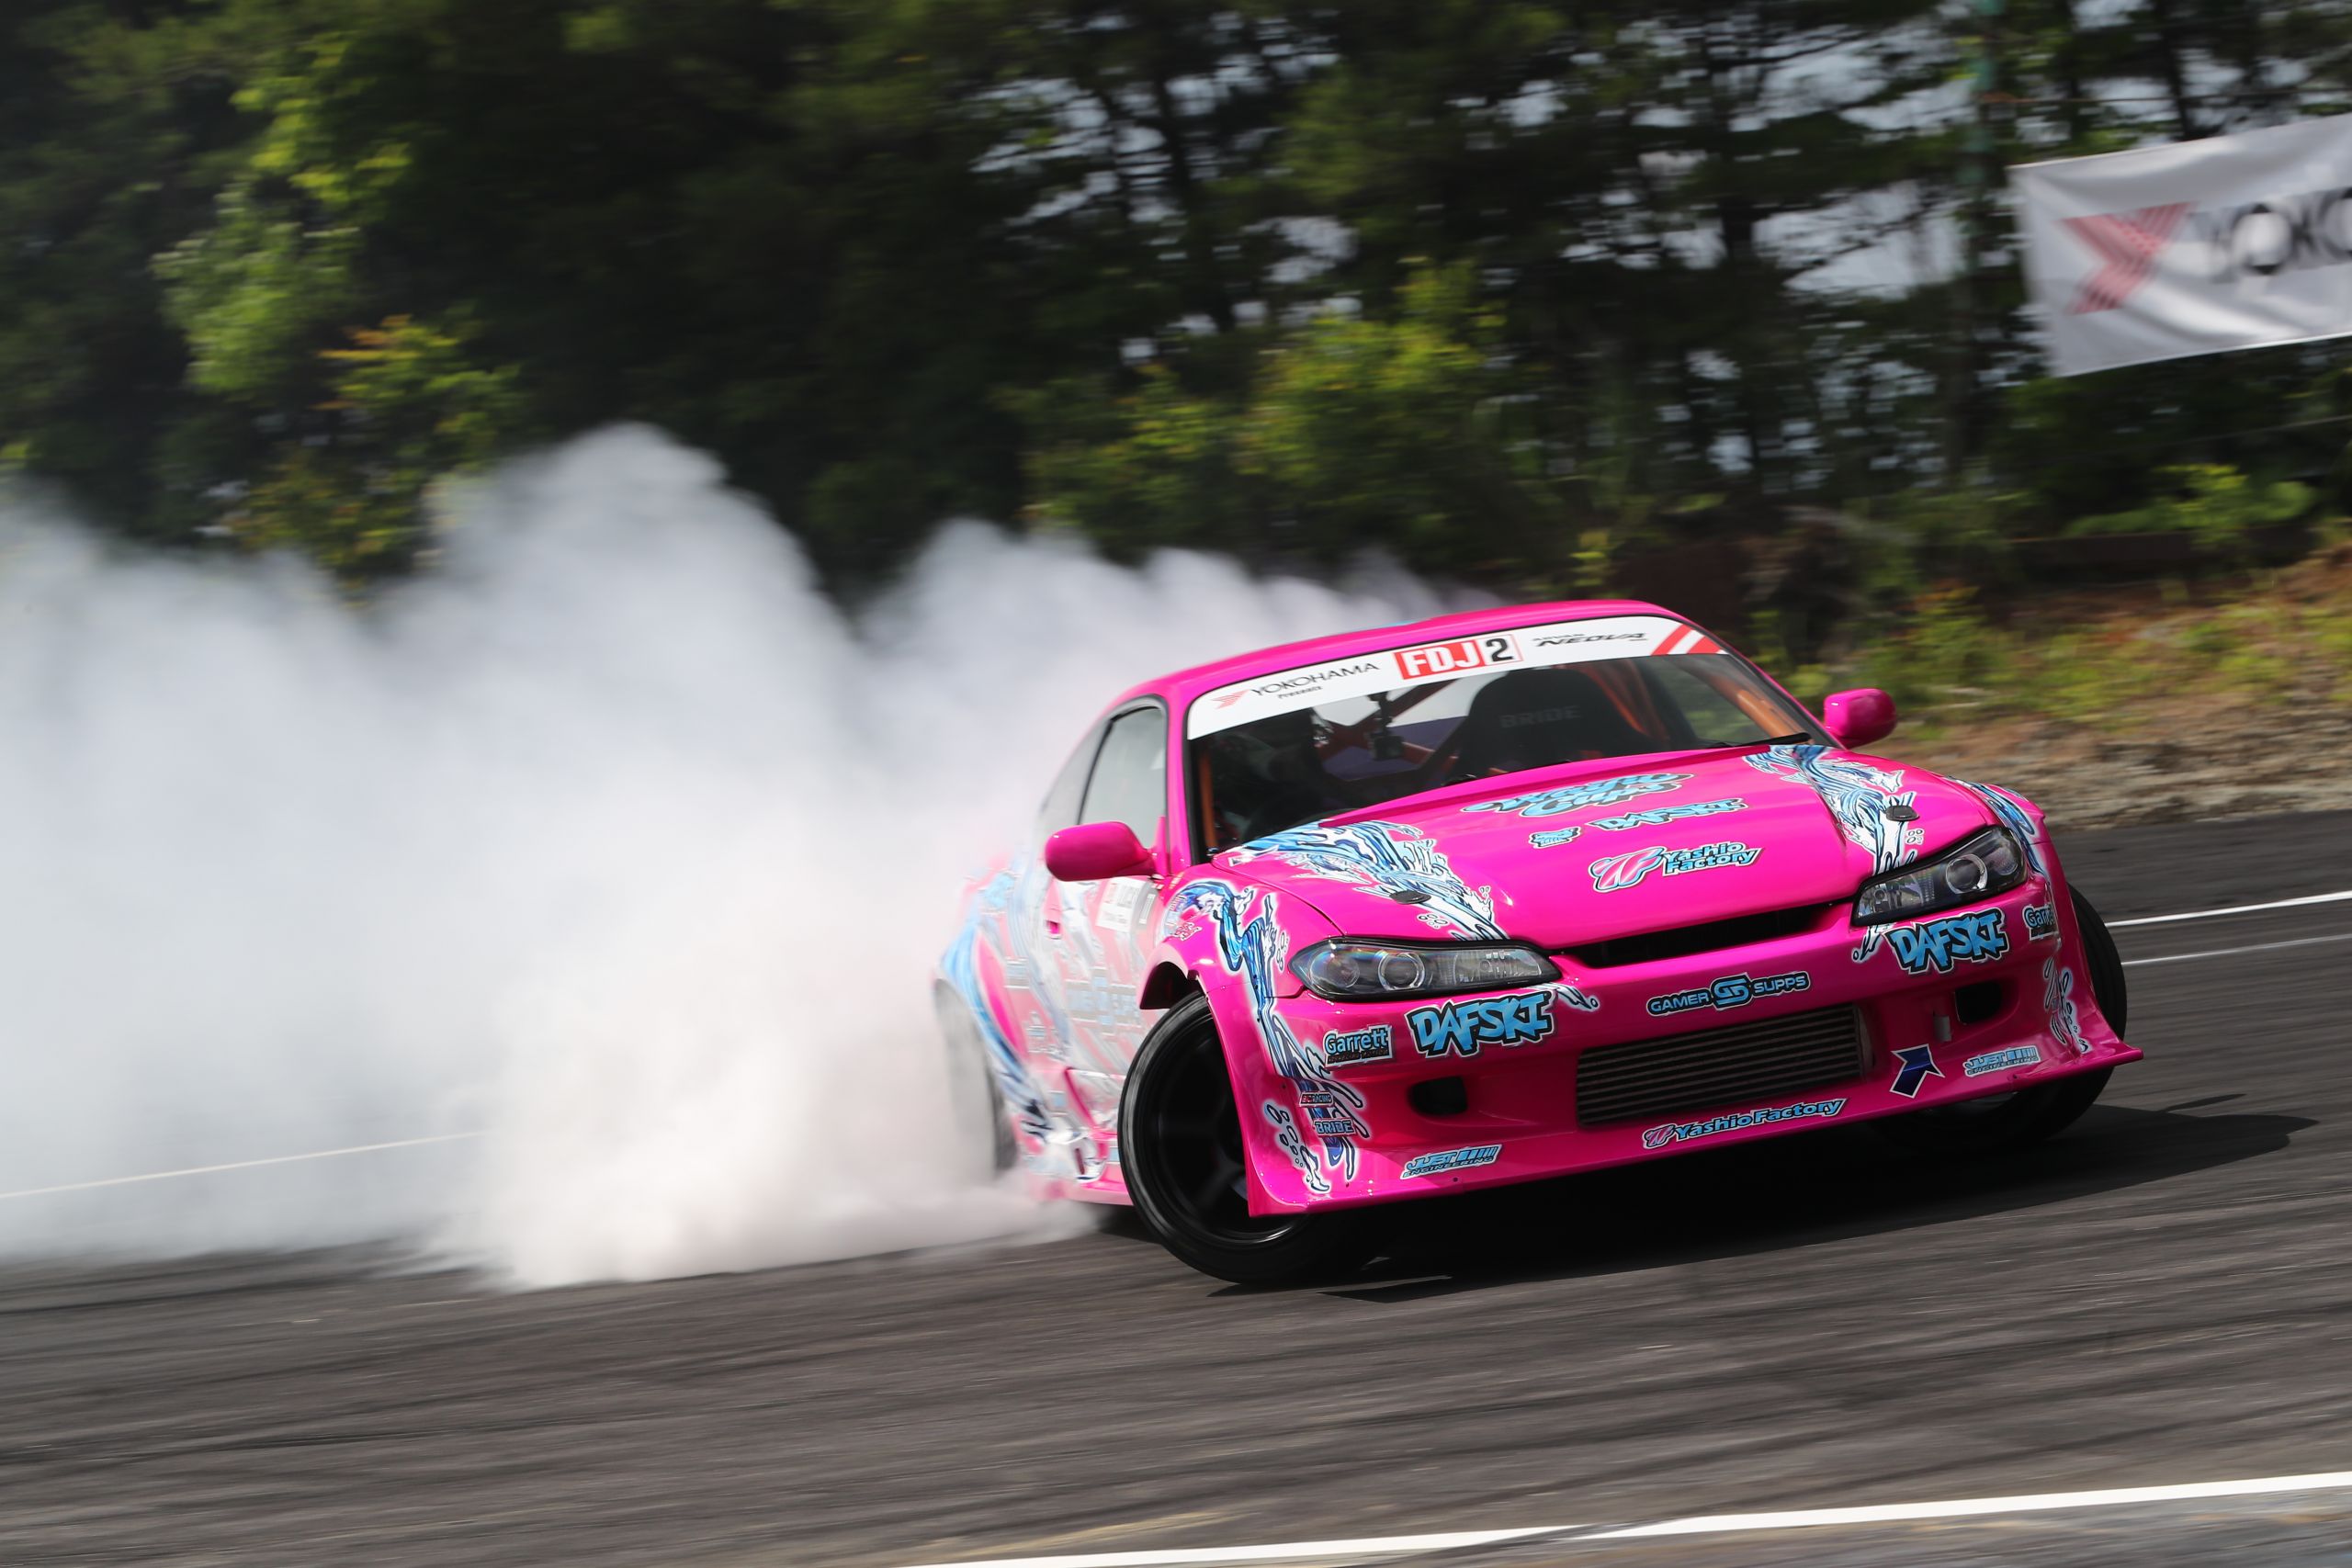 Agreed! Drifting does put a smile!